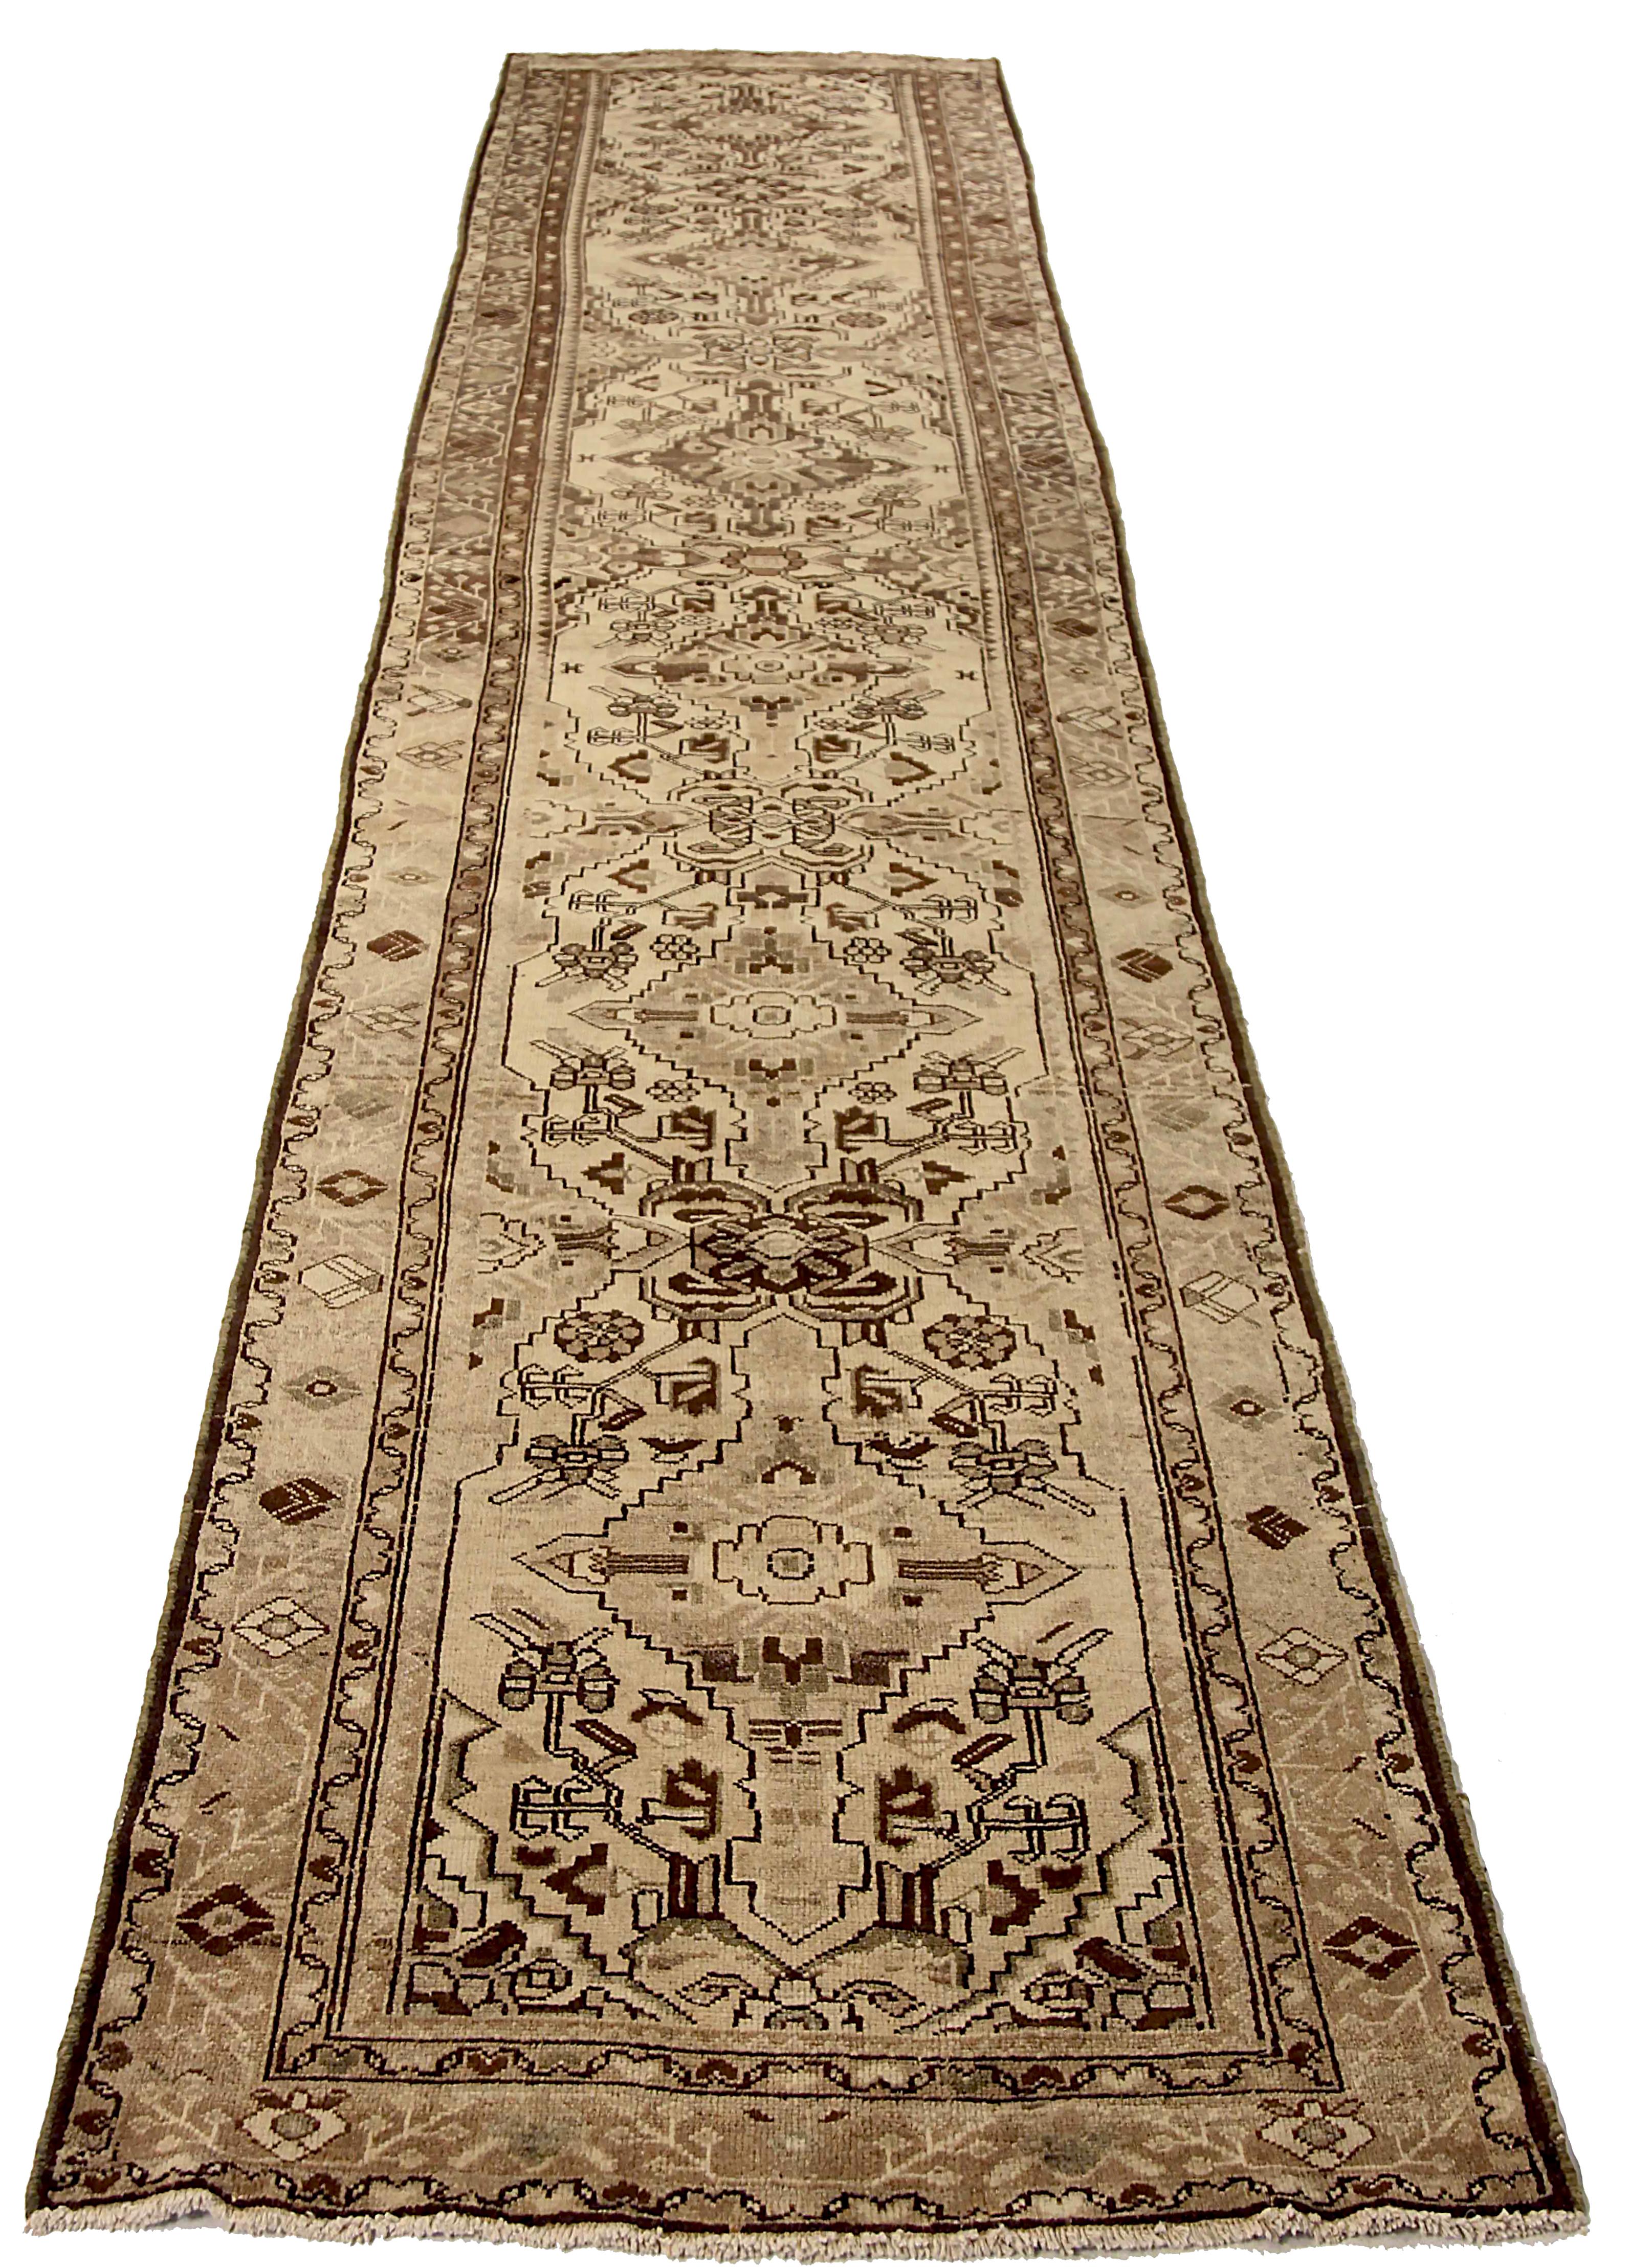 Antique Persian runner rug handwoven from the finest sheep’s wool. It’s colored with all-natural vegetable dyes that are safe for humans and pets. It’s a traditional Malayer design featuring floral details on an ivory field. It’s a lovely piece to